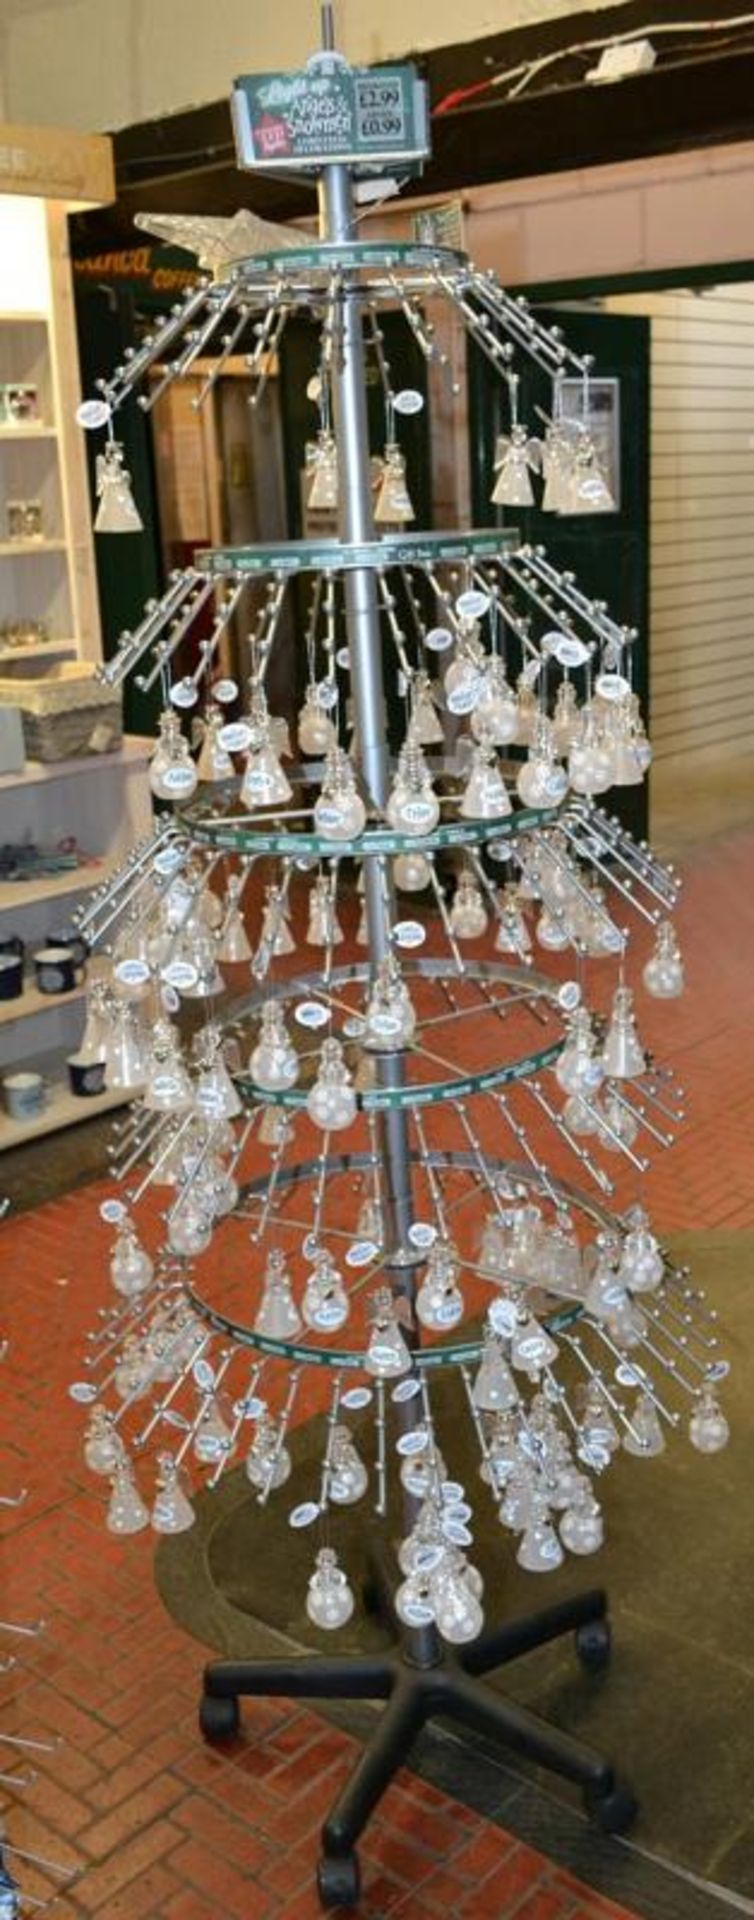 1 x Retail Carousel Display Stand With Approx 100 x Personalised Angel & Snowman Decorations - Ref B